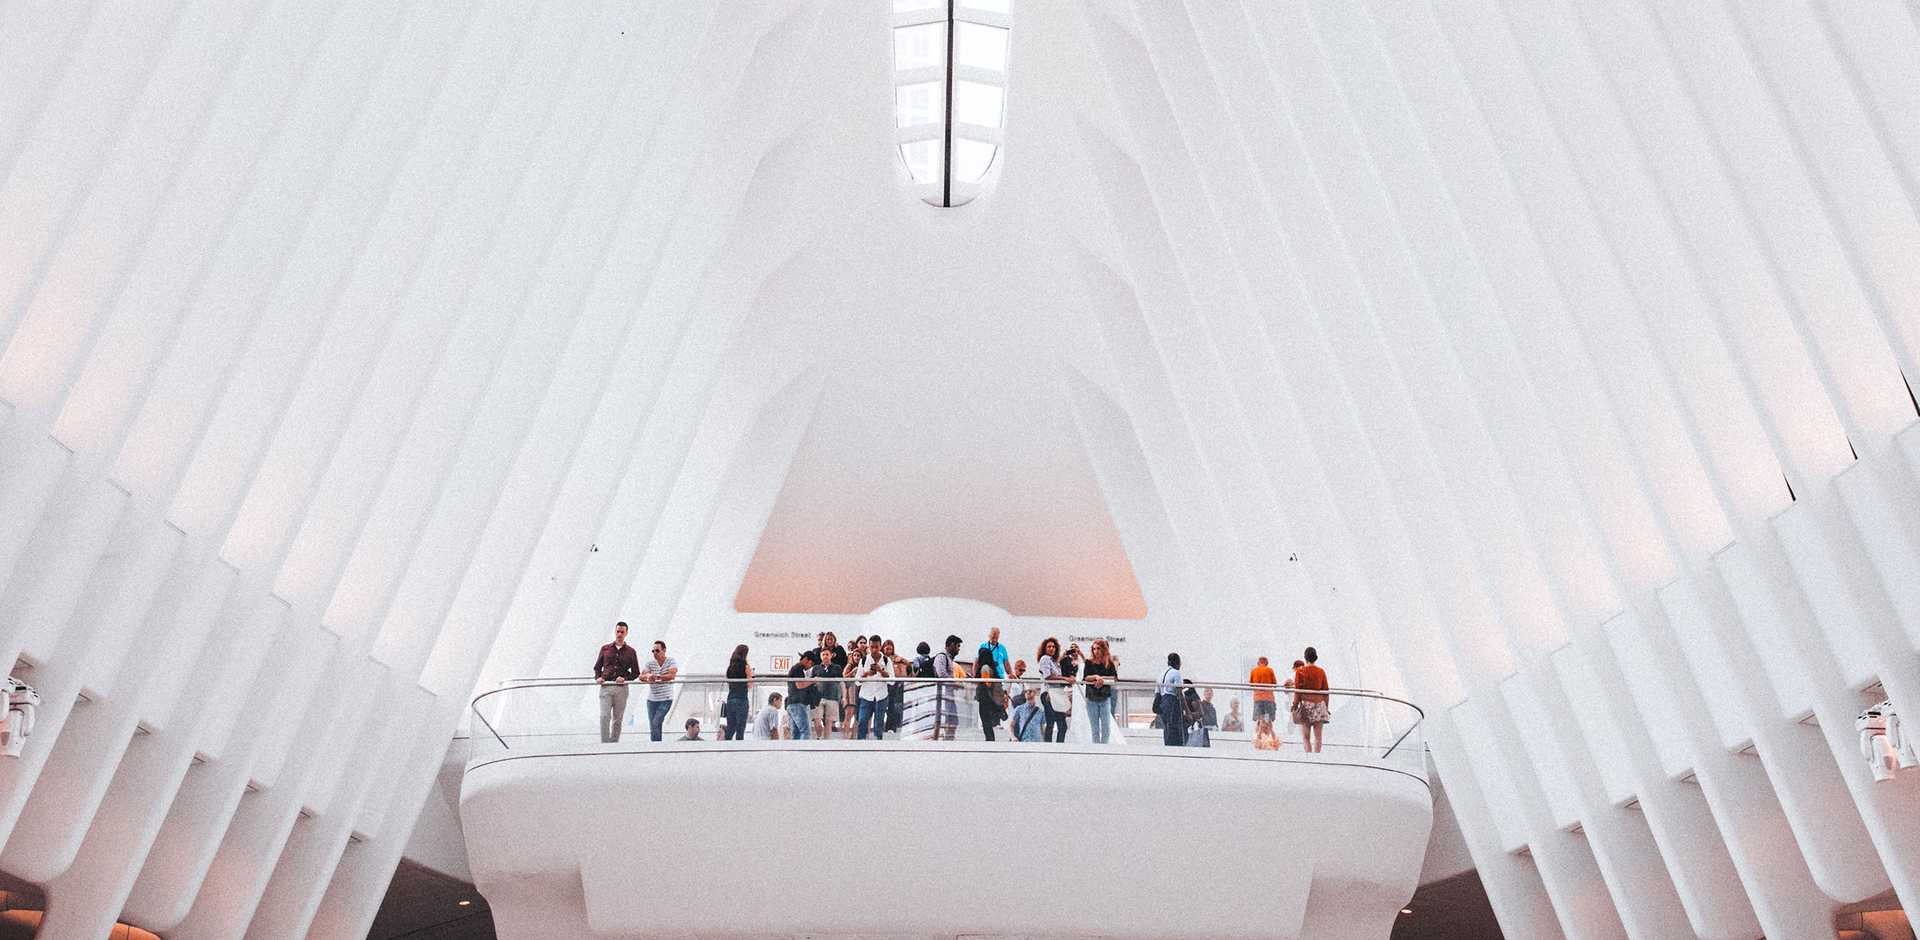 The "Oculus" at World Trade Center station in New York City